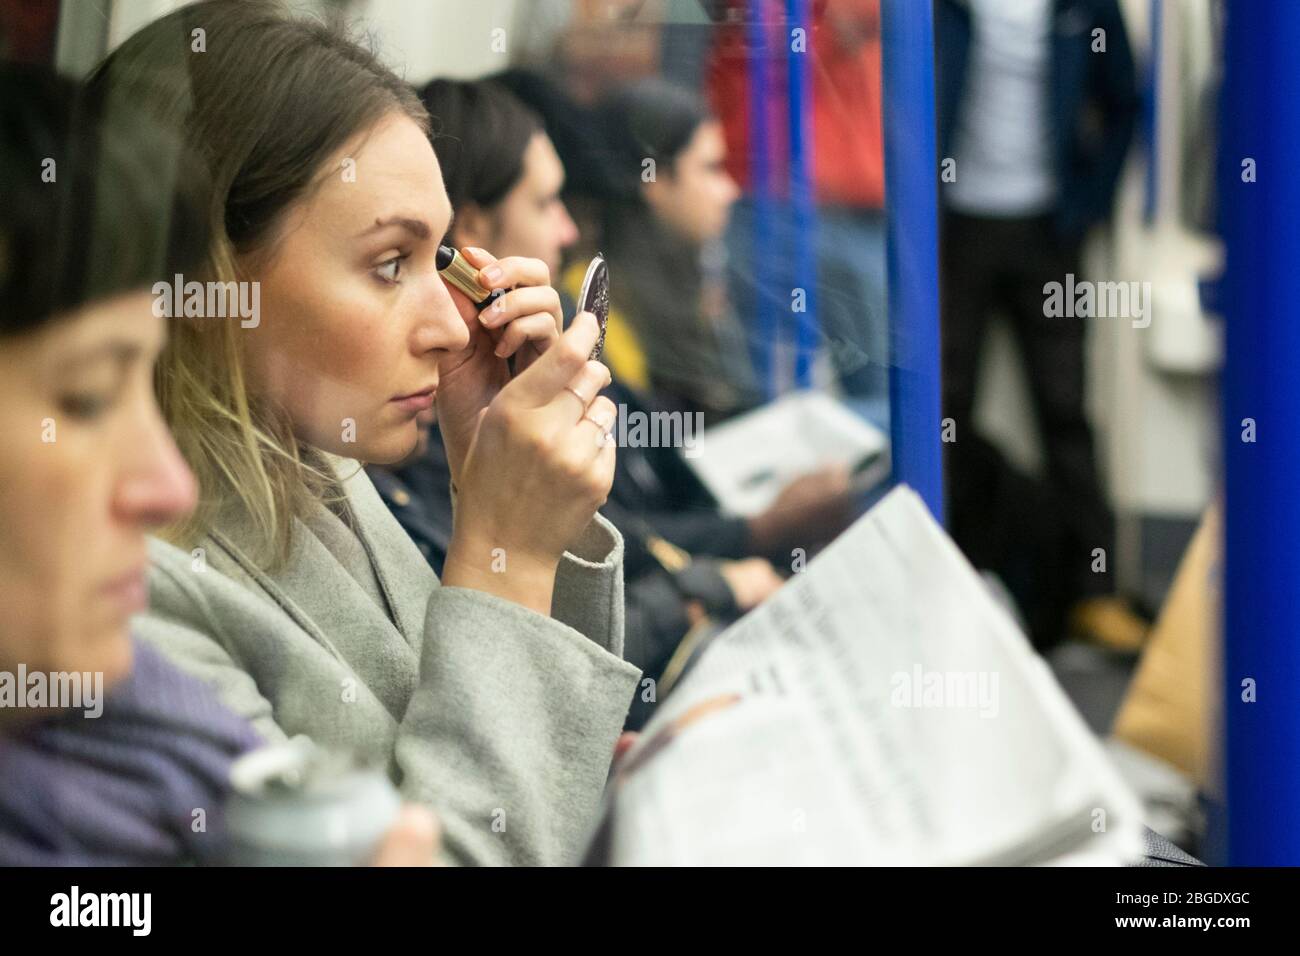 Profile view of a women applying makeup on the Northern Line of the London Underground Stock Photo